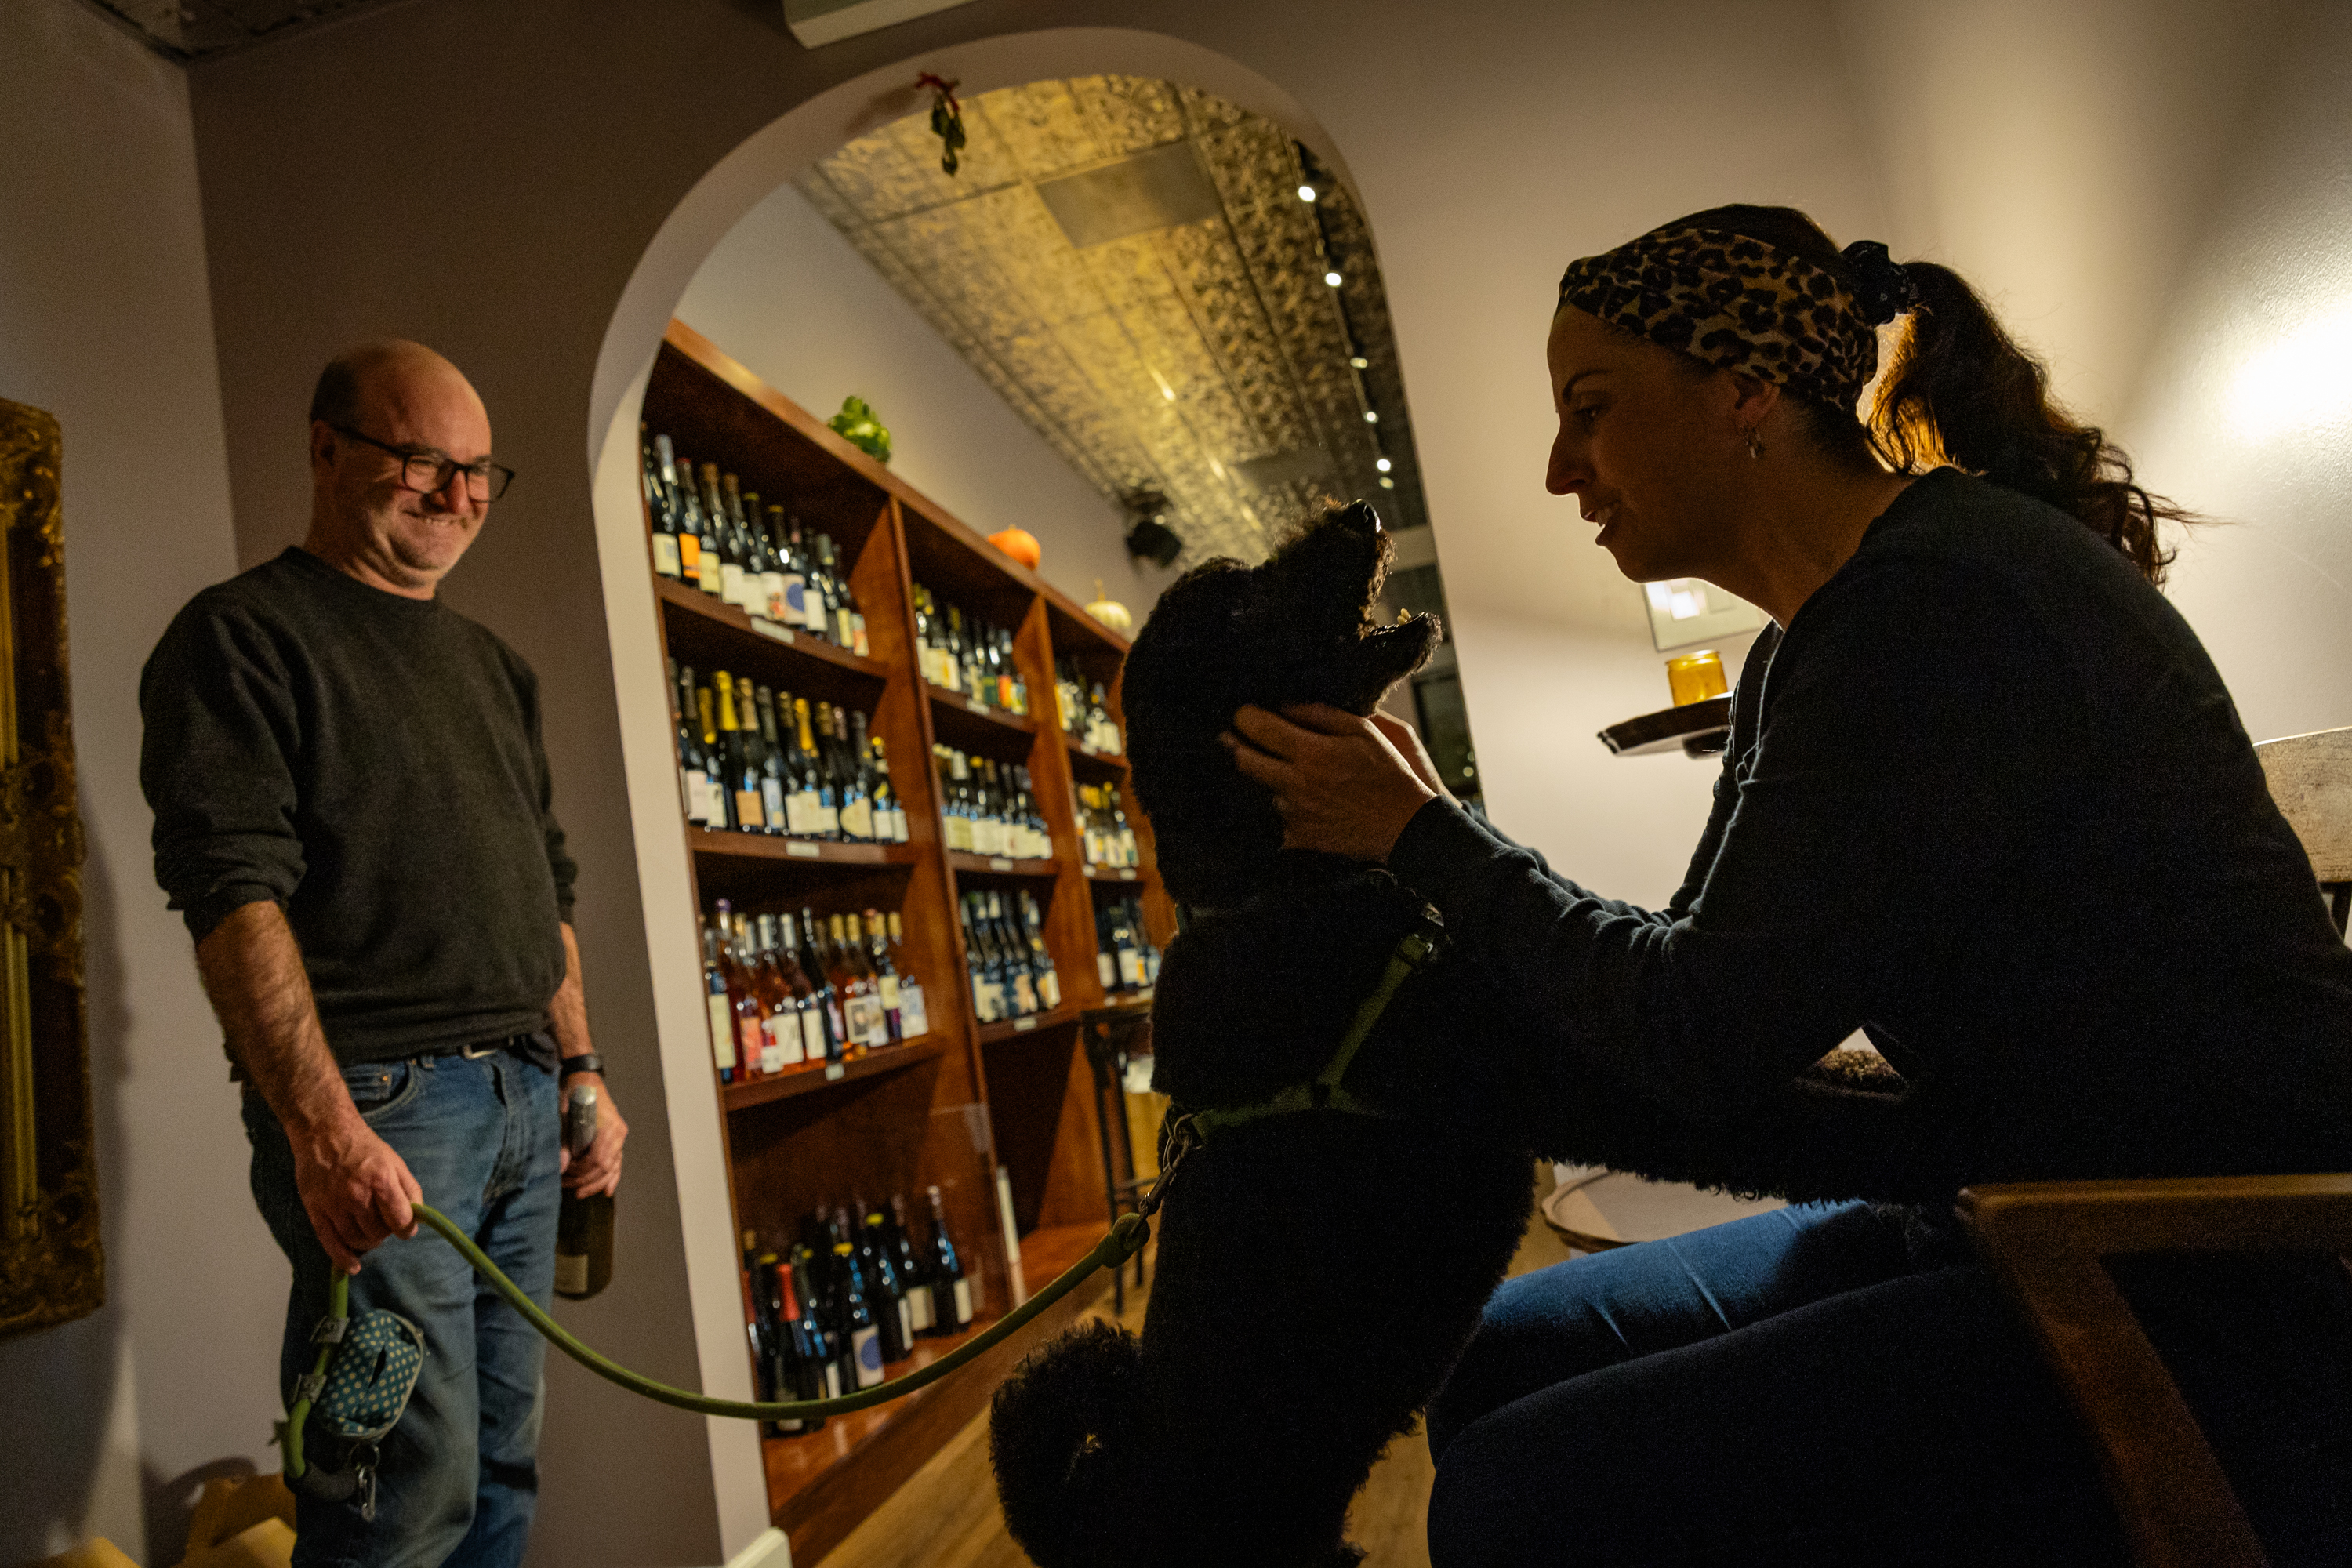 A woman pets a dog in a wine shop as the dog owner smiles.